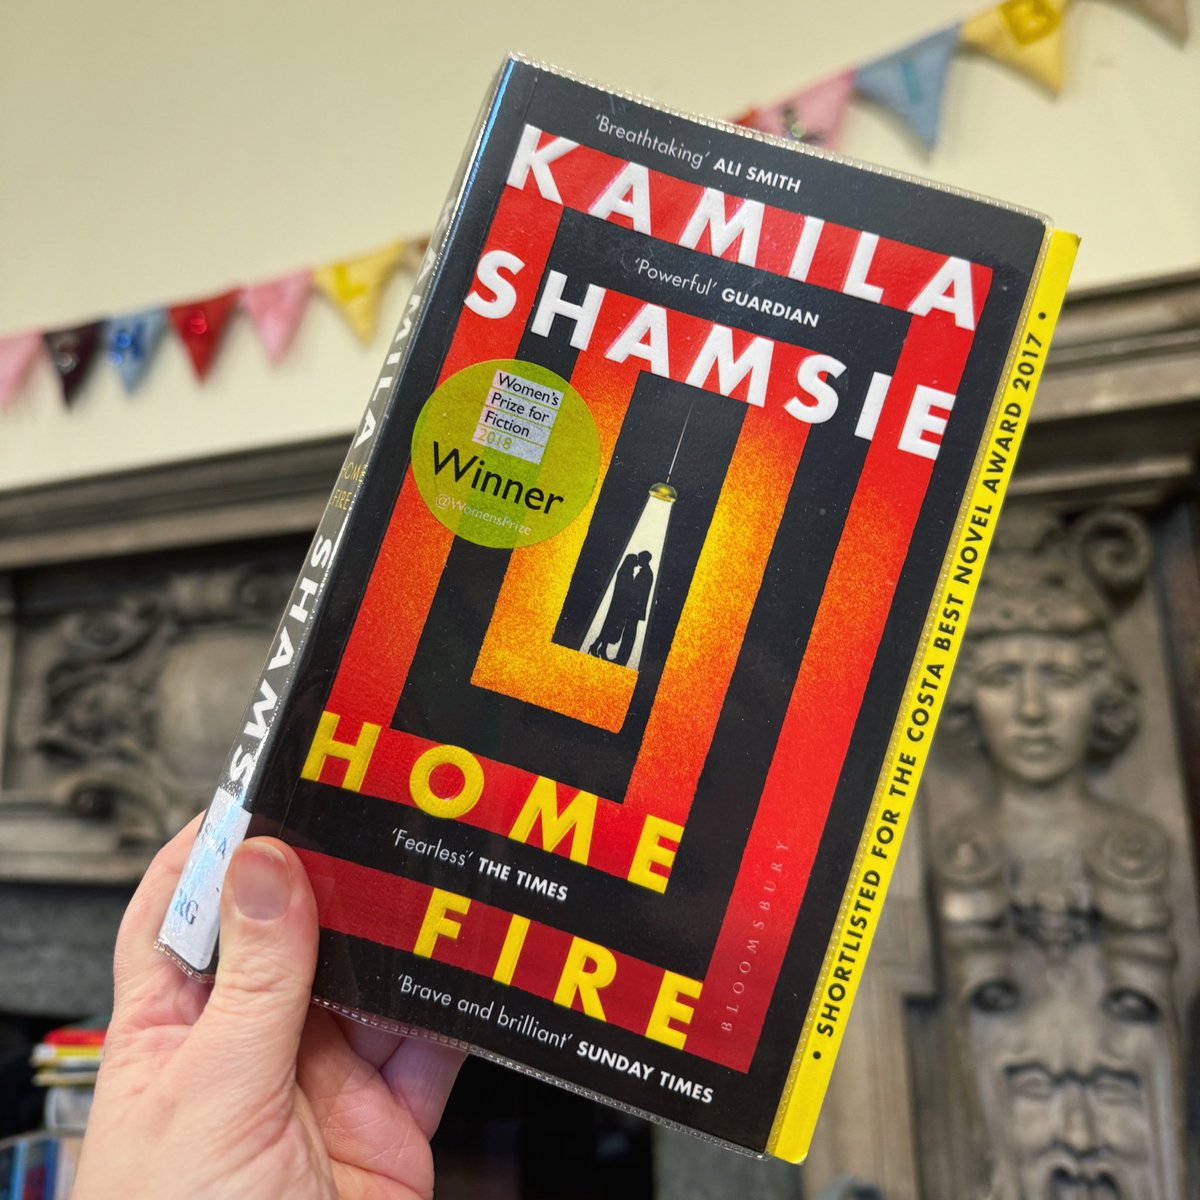 The #CharltonLibrary morning Reading Group enjoyed discussing this month’s book ‘Home Fire’ by @kamilashamsie last week! 📖 This group is full, but our evening group has space for new members! We have a great chat, as well as have drinks + biscuits! ☕️🍪 #LoveYourLibrary